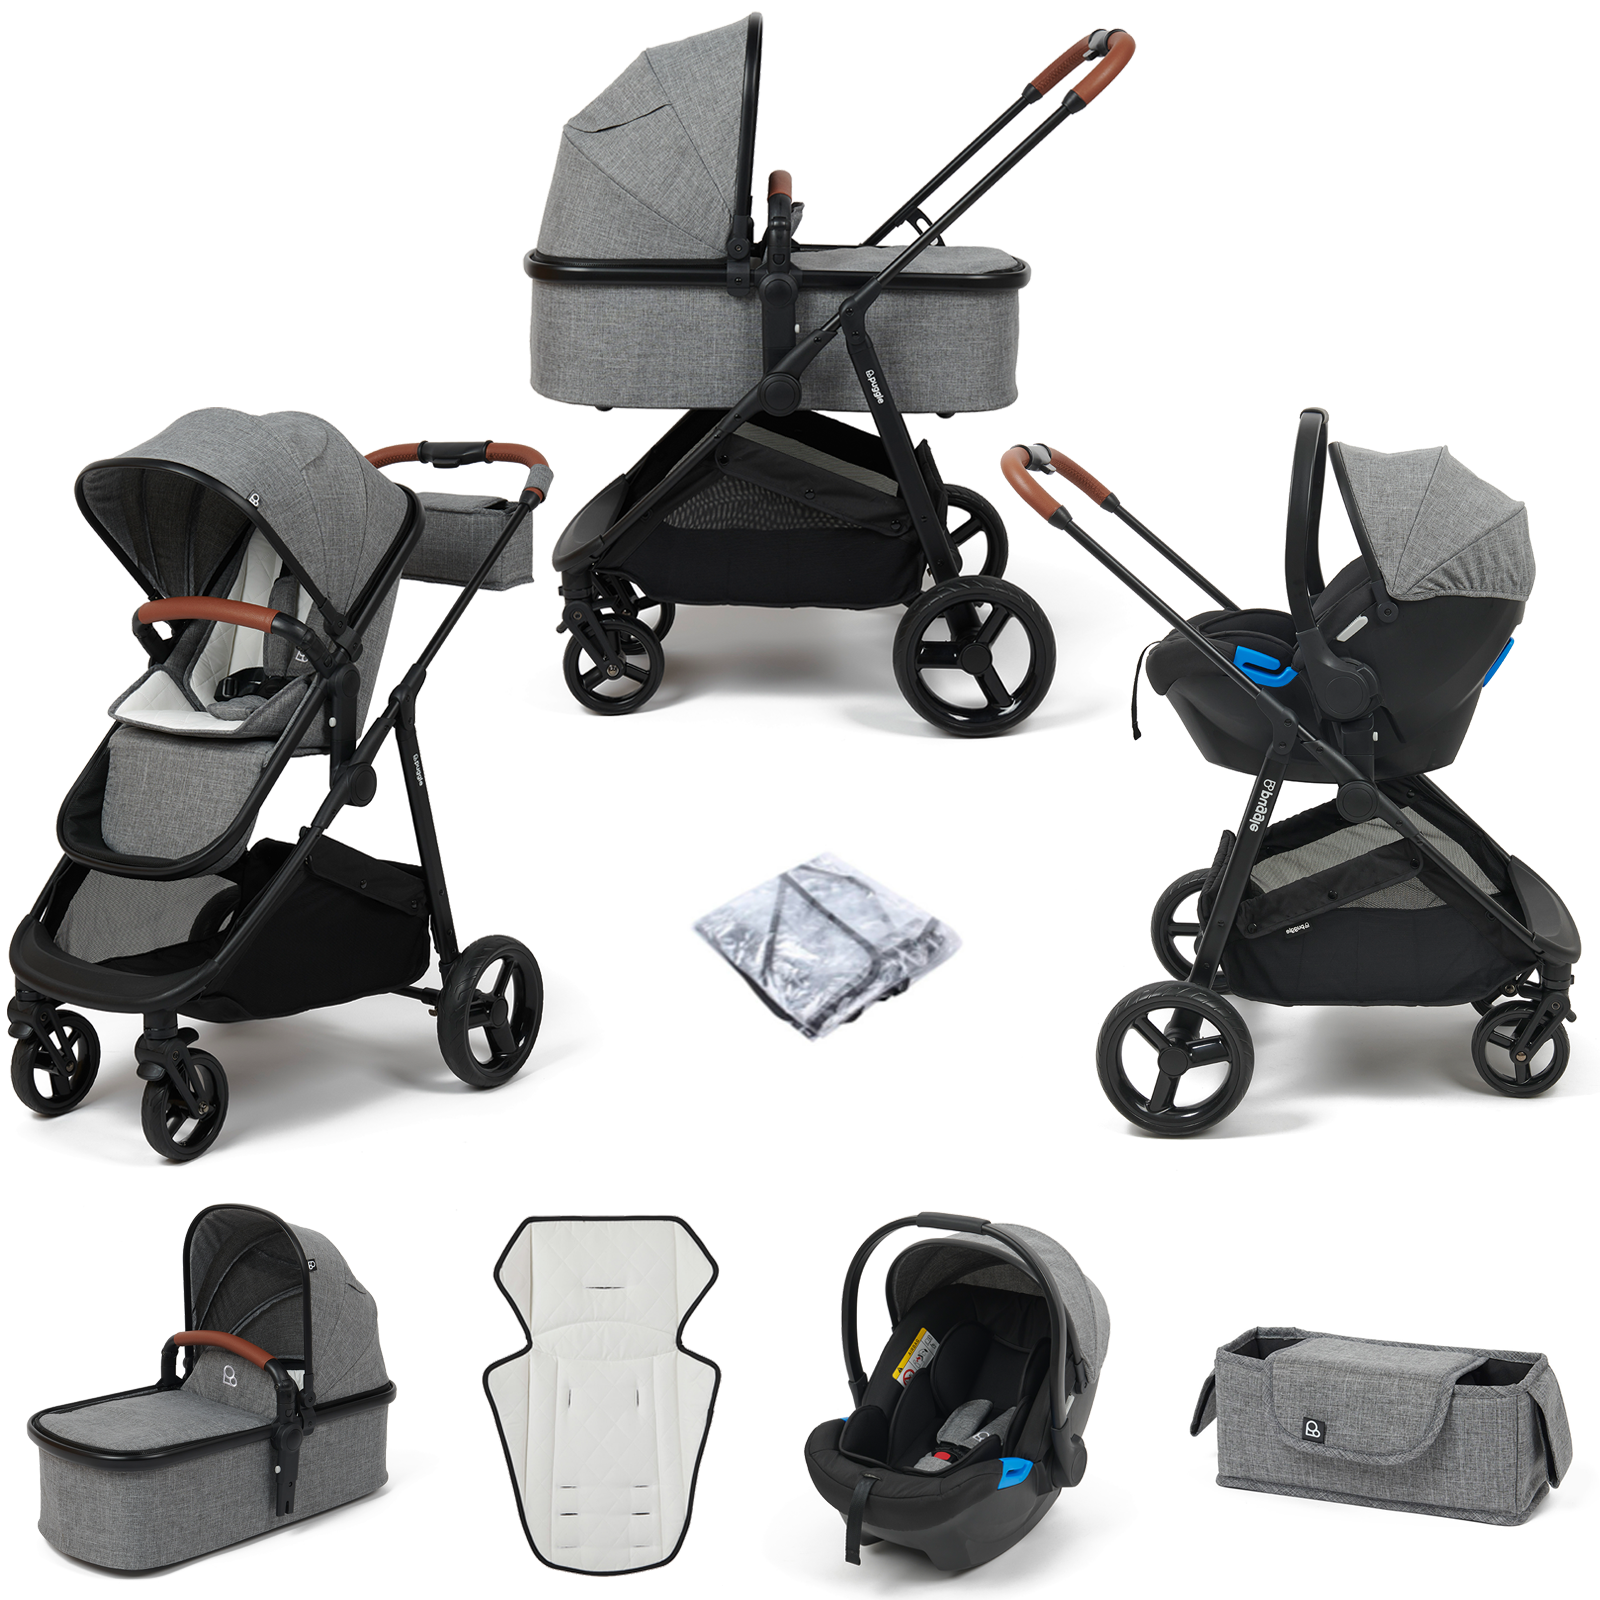 Puggle Monaco XT 3in1 Travel System with Organiser - Graphite Grey